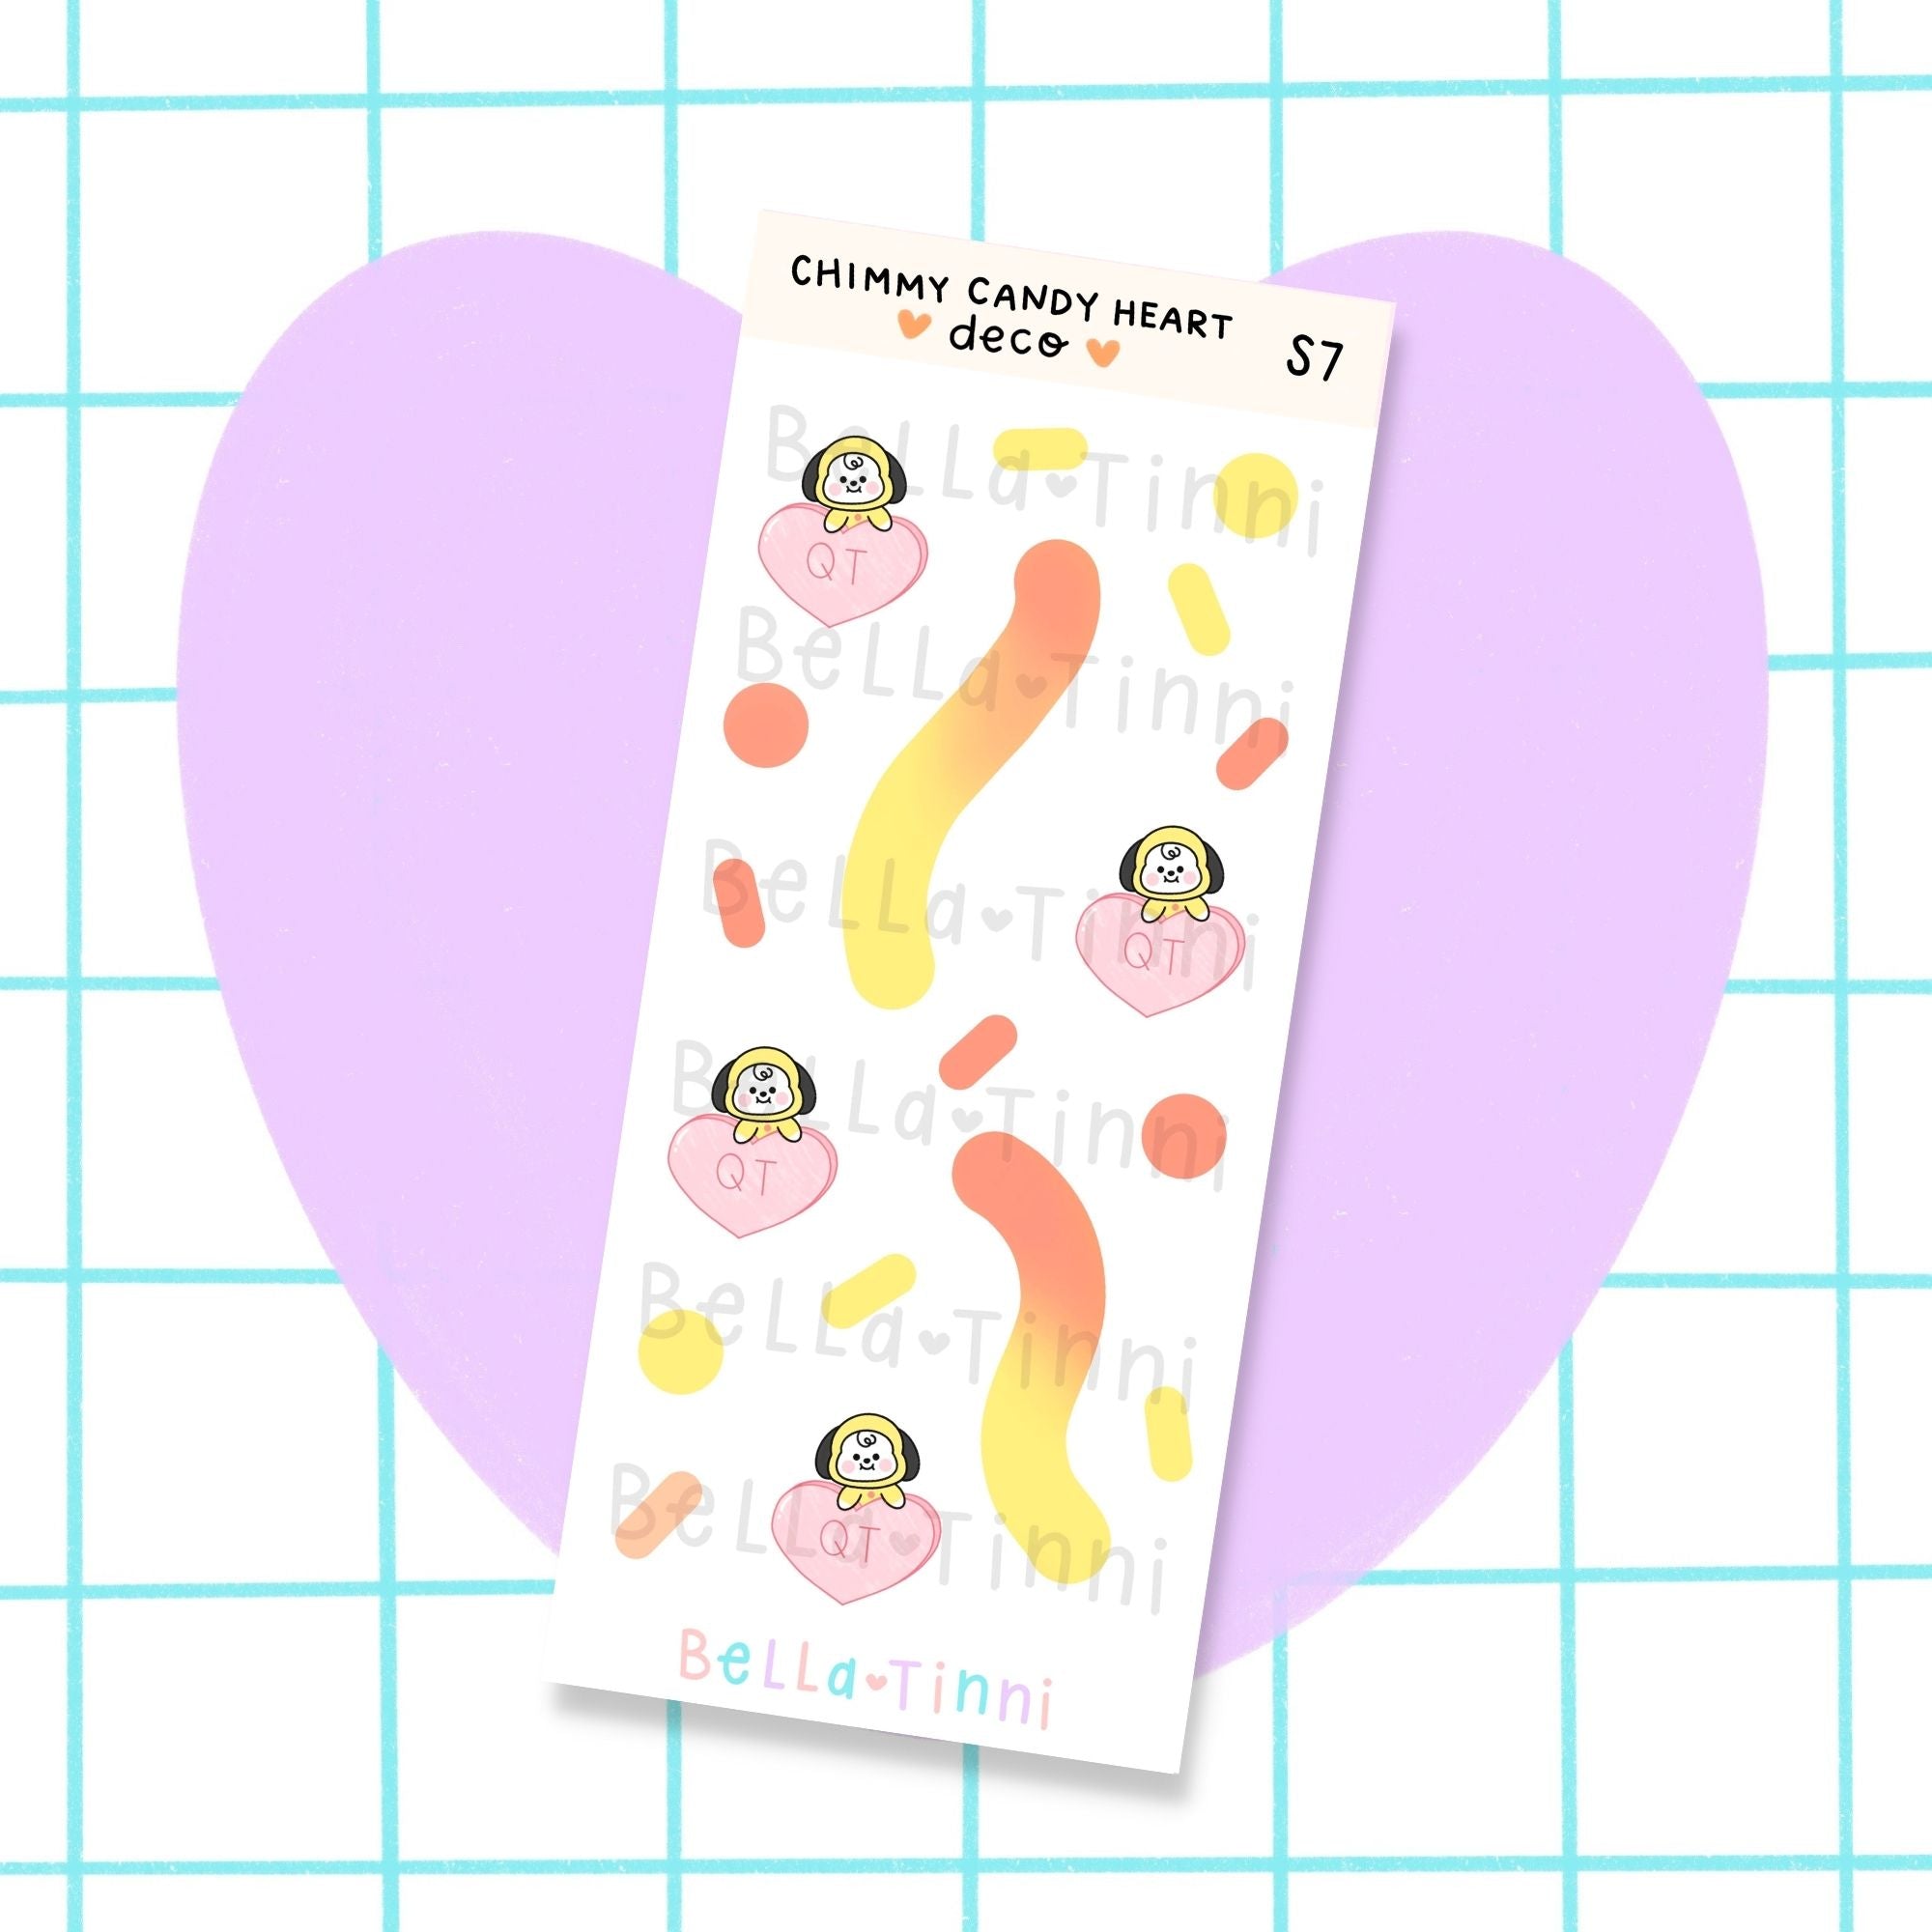 Chimmy Candy Heart Deco - S7